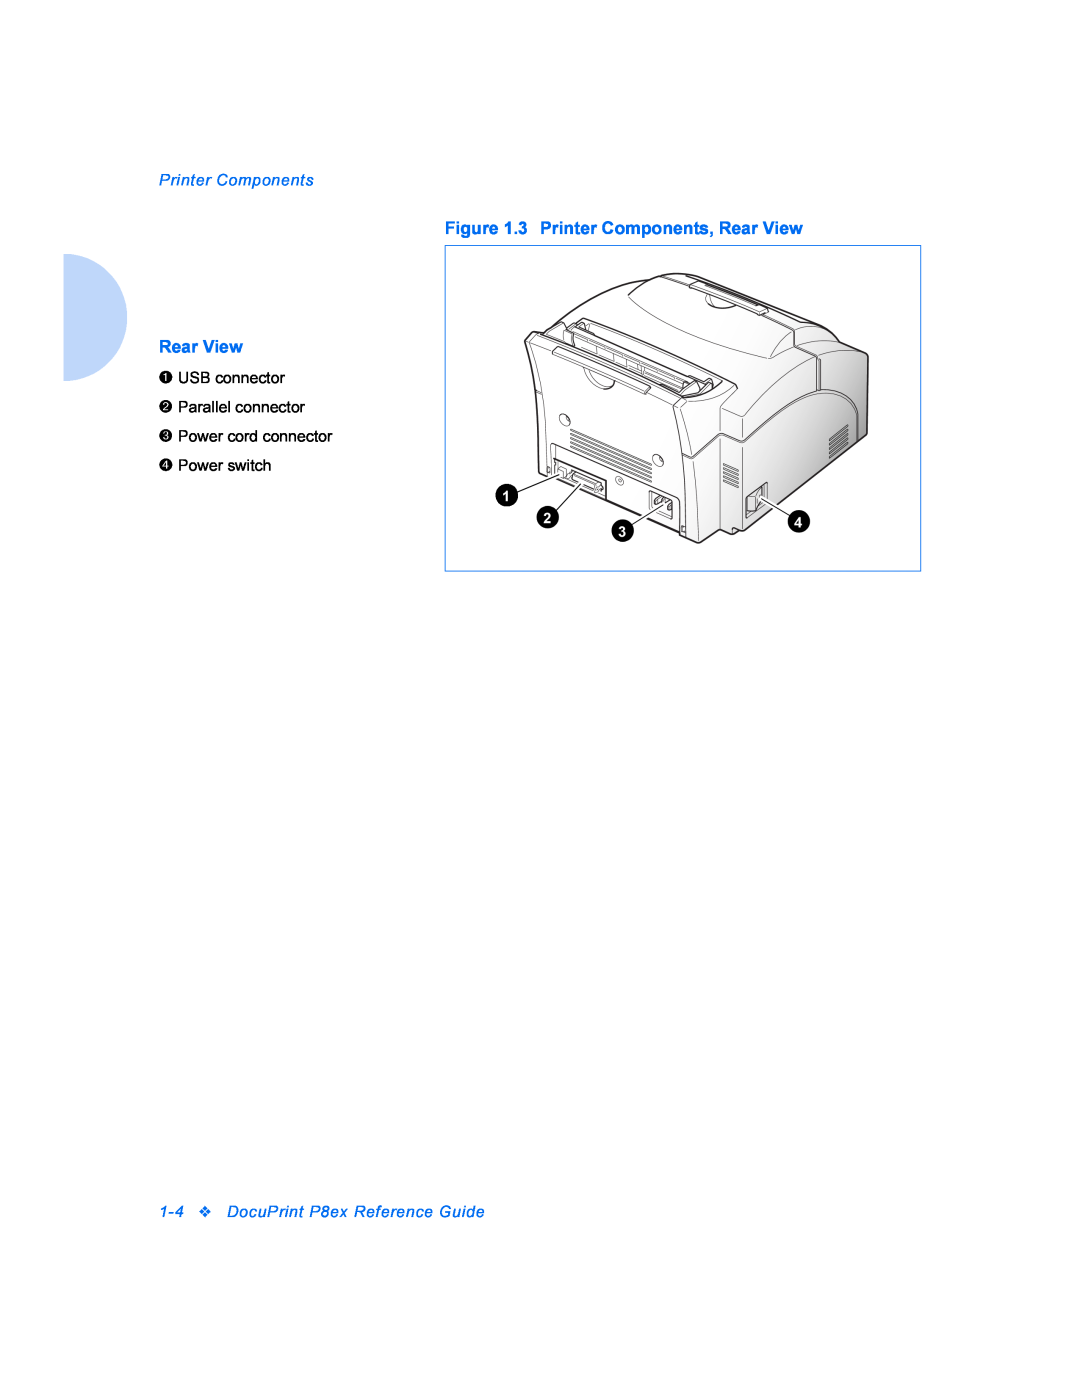 Xerox manual 3 Printer Components, Rear View, 1-4DocuPrint P8ex Reference Guide 